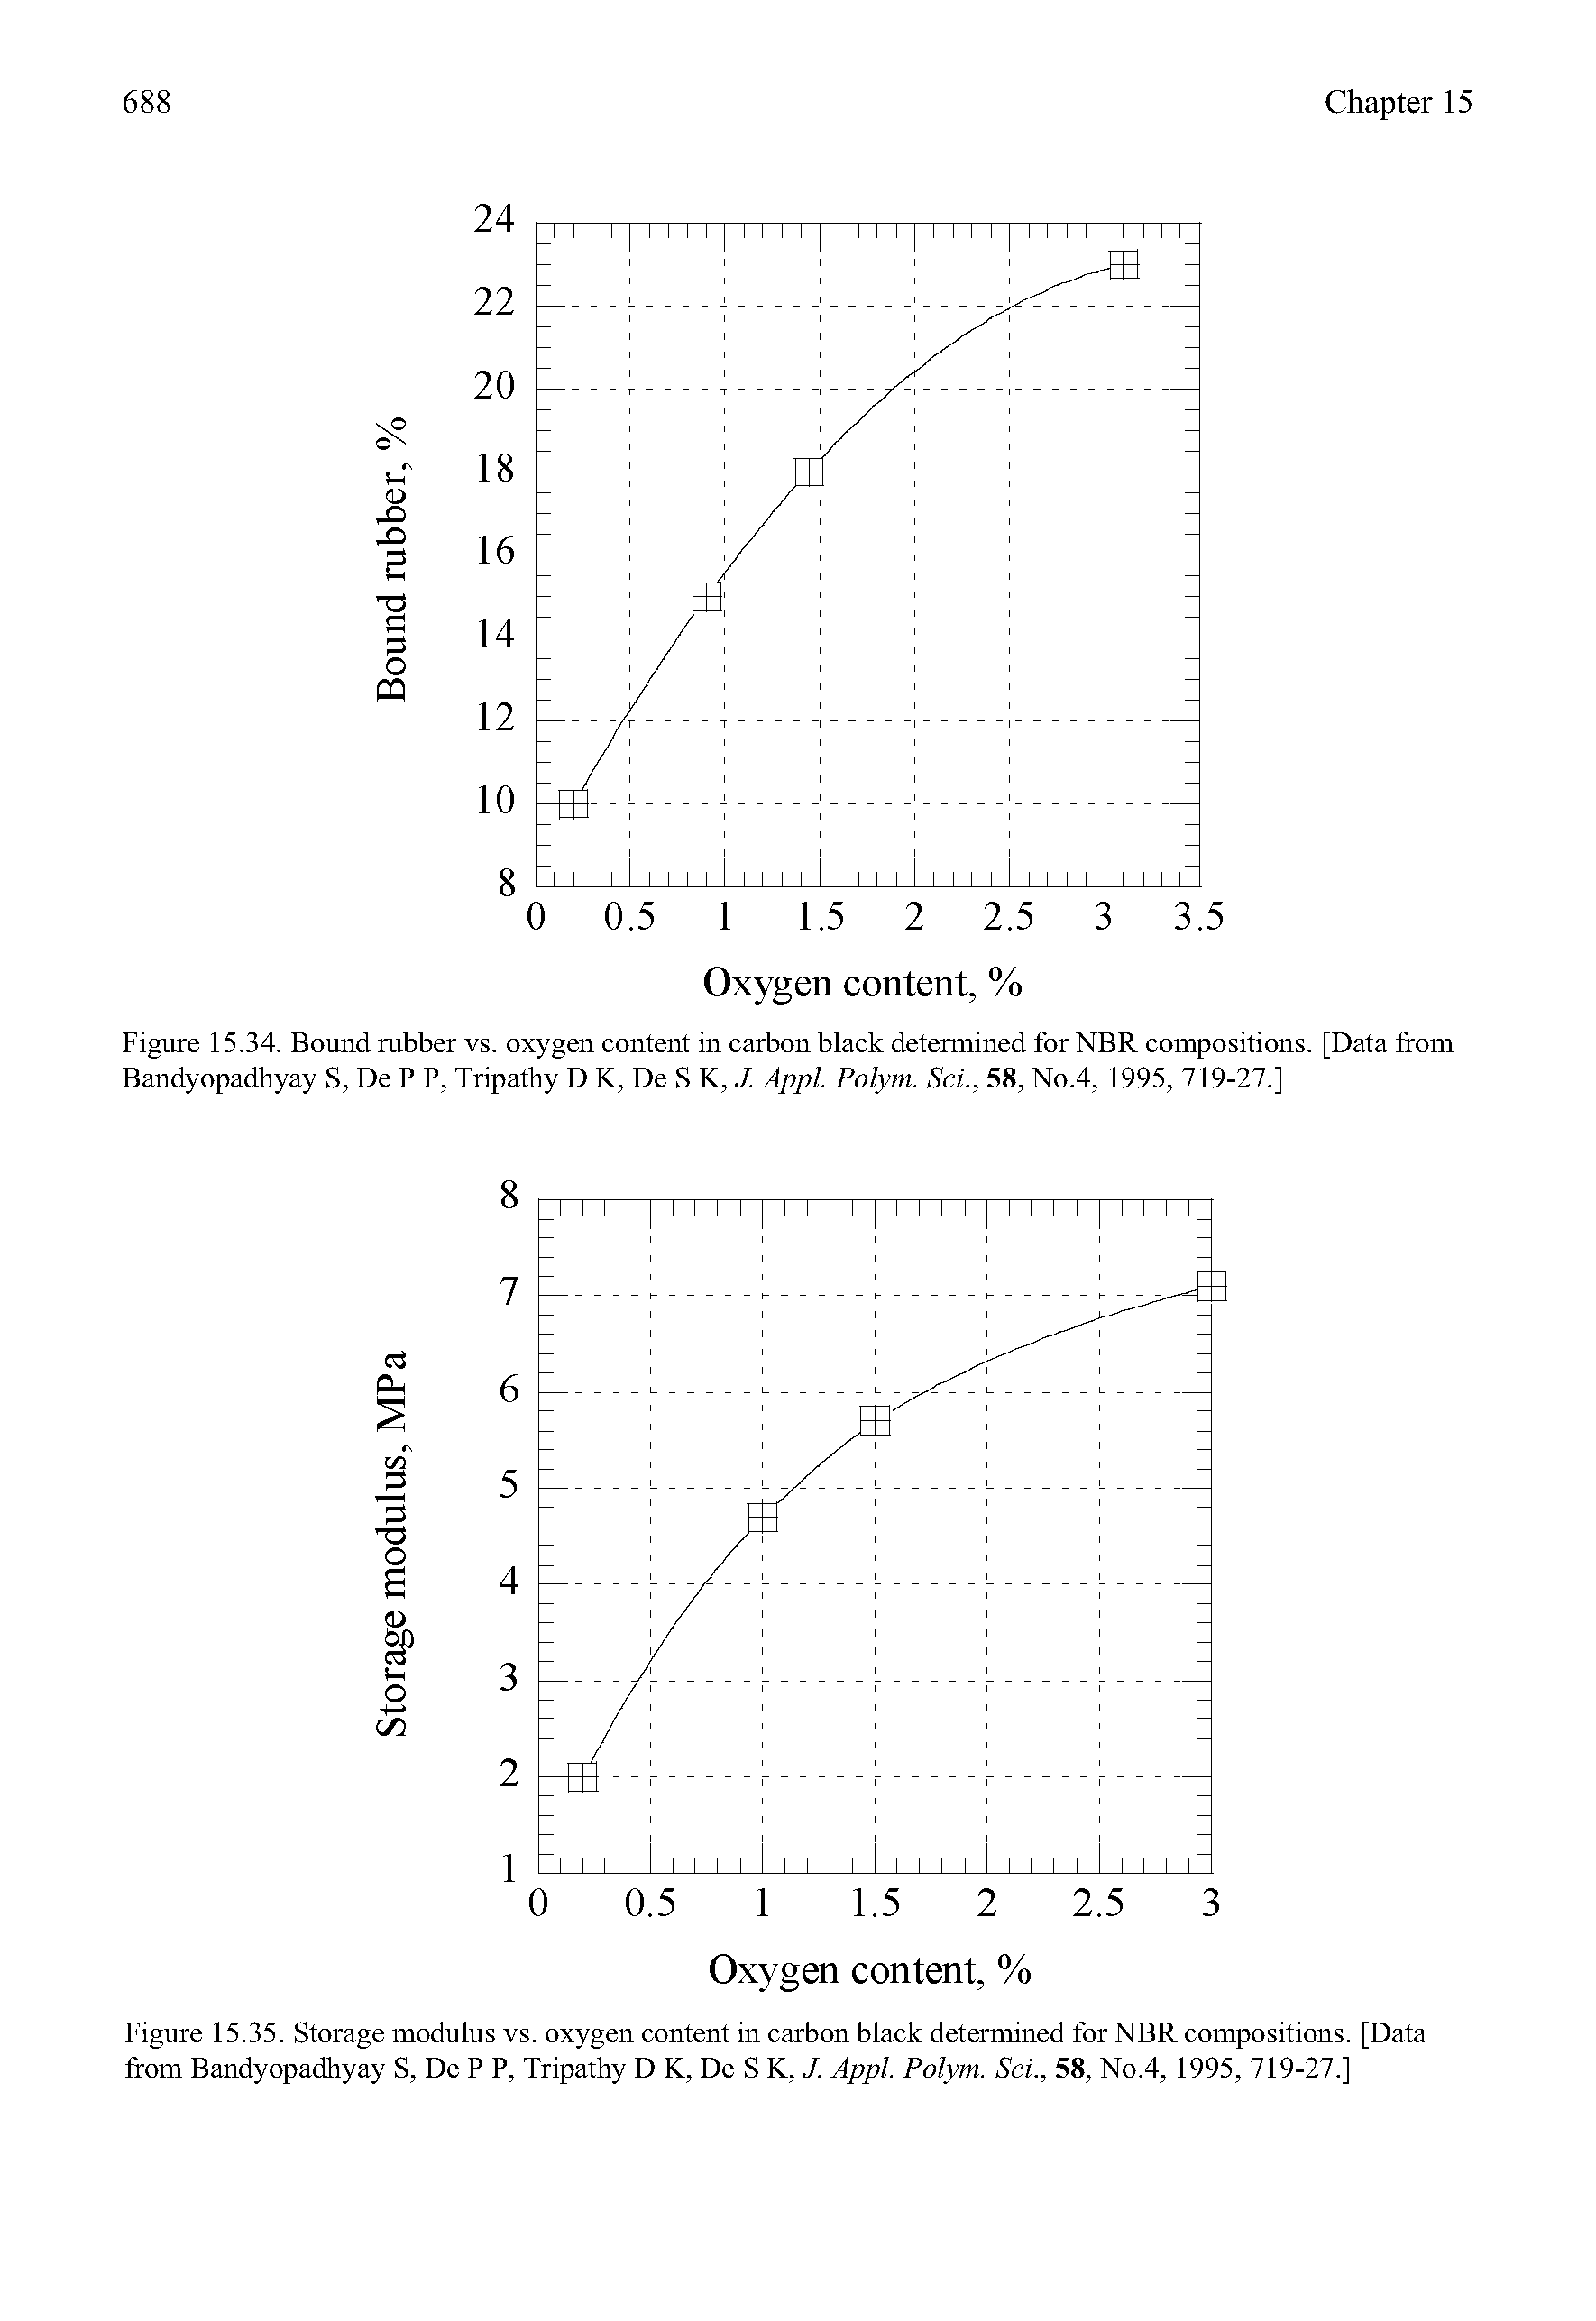 Figure 15.34. Bound rubber vs. oxygen content in carbon black determined for NBR compositions. [Data from Bandyopadhyay S, De P P, Tripathy D K, De S K, J. Appl. Polym. Sci., 58, No.4, 1995, 719-27.]...